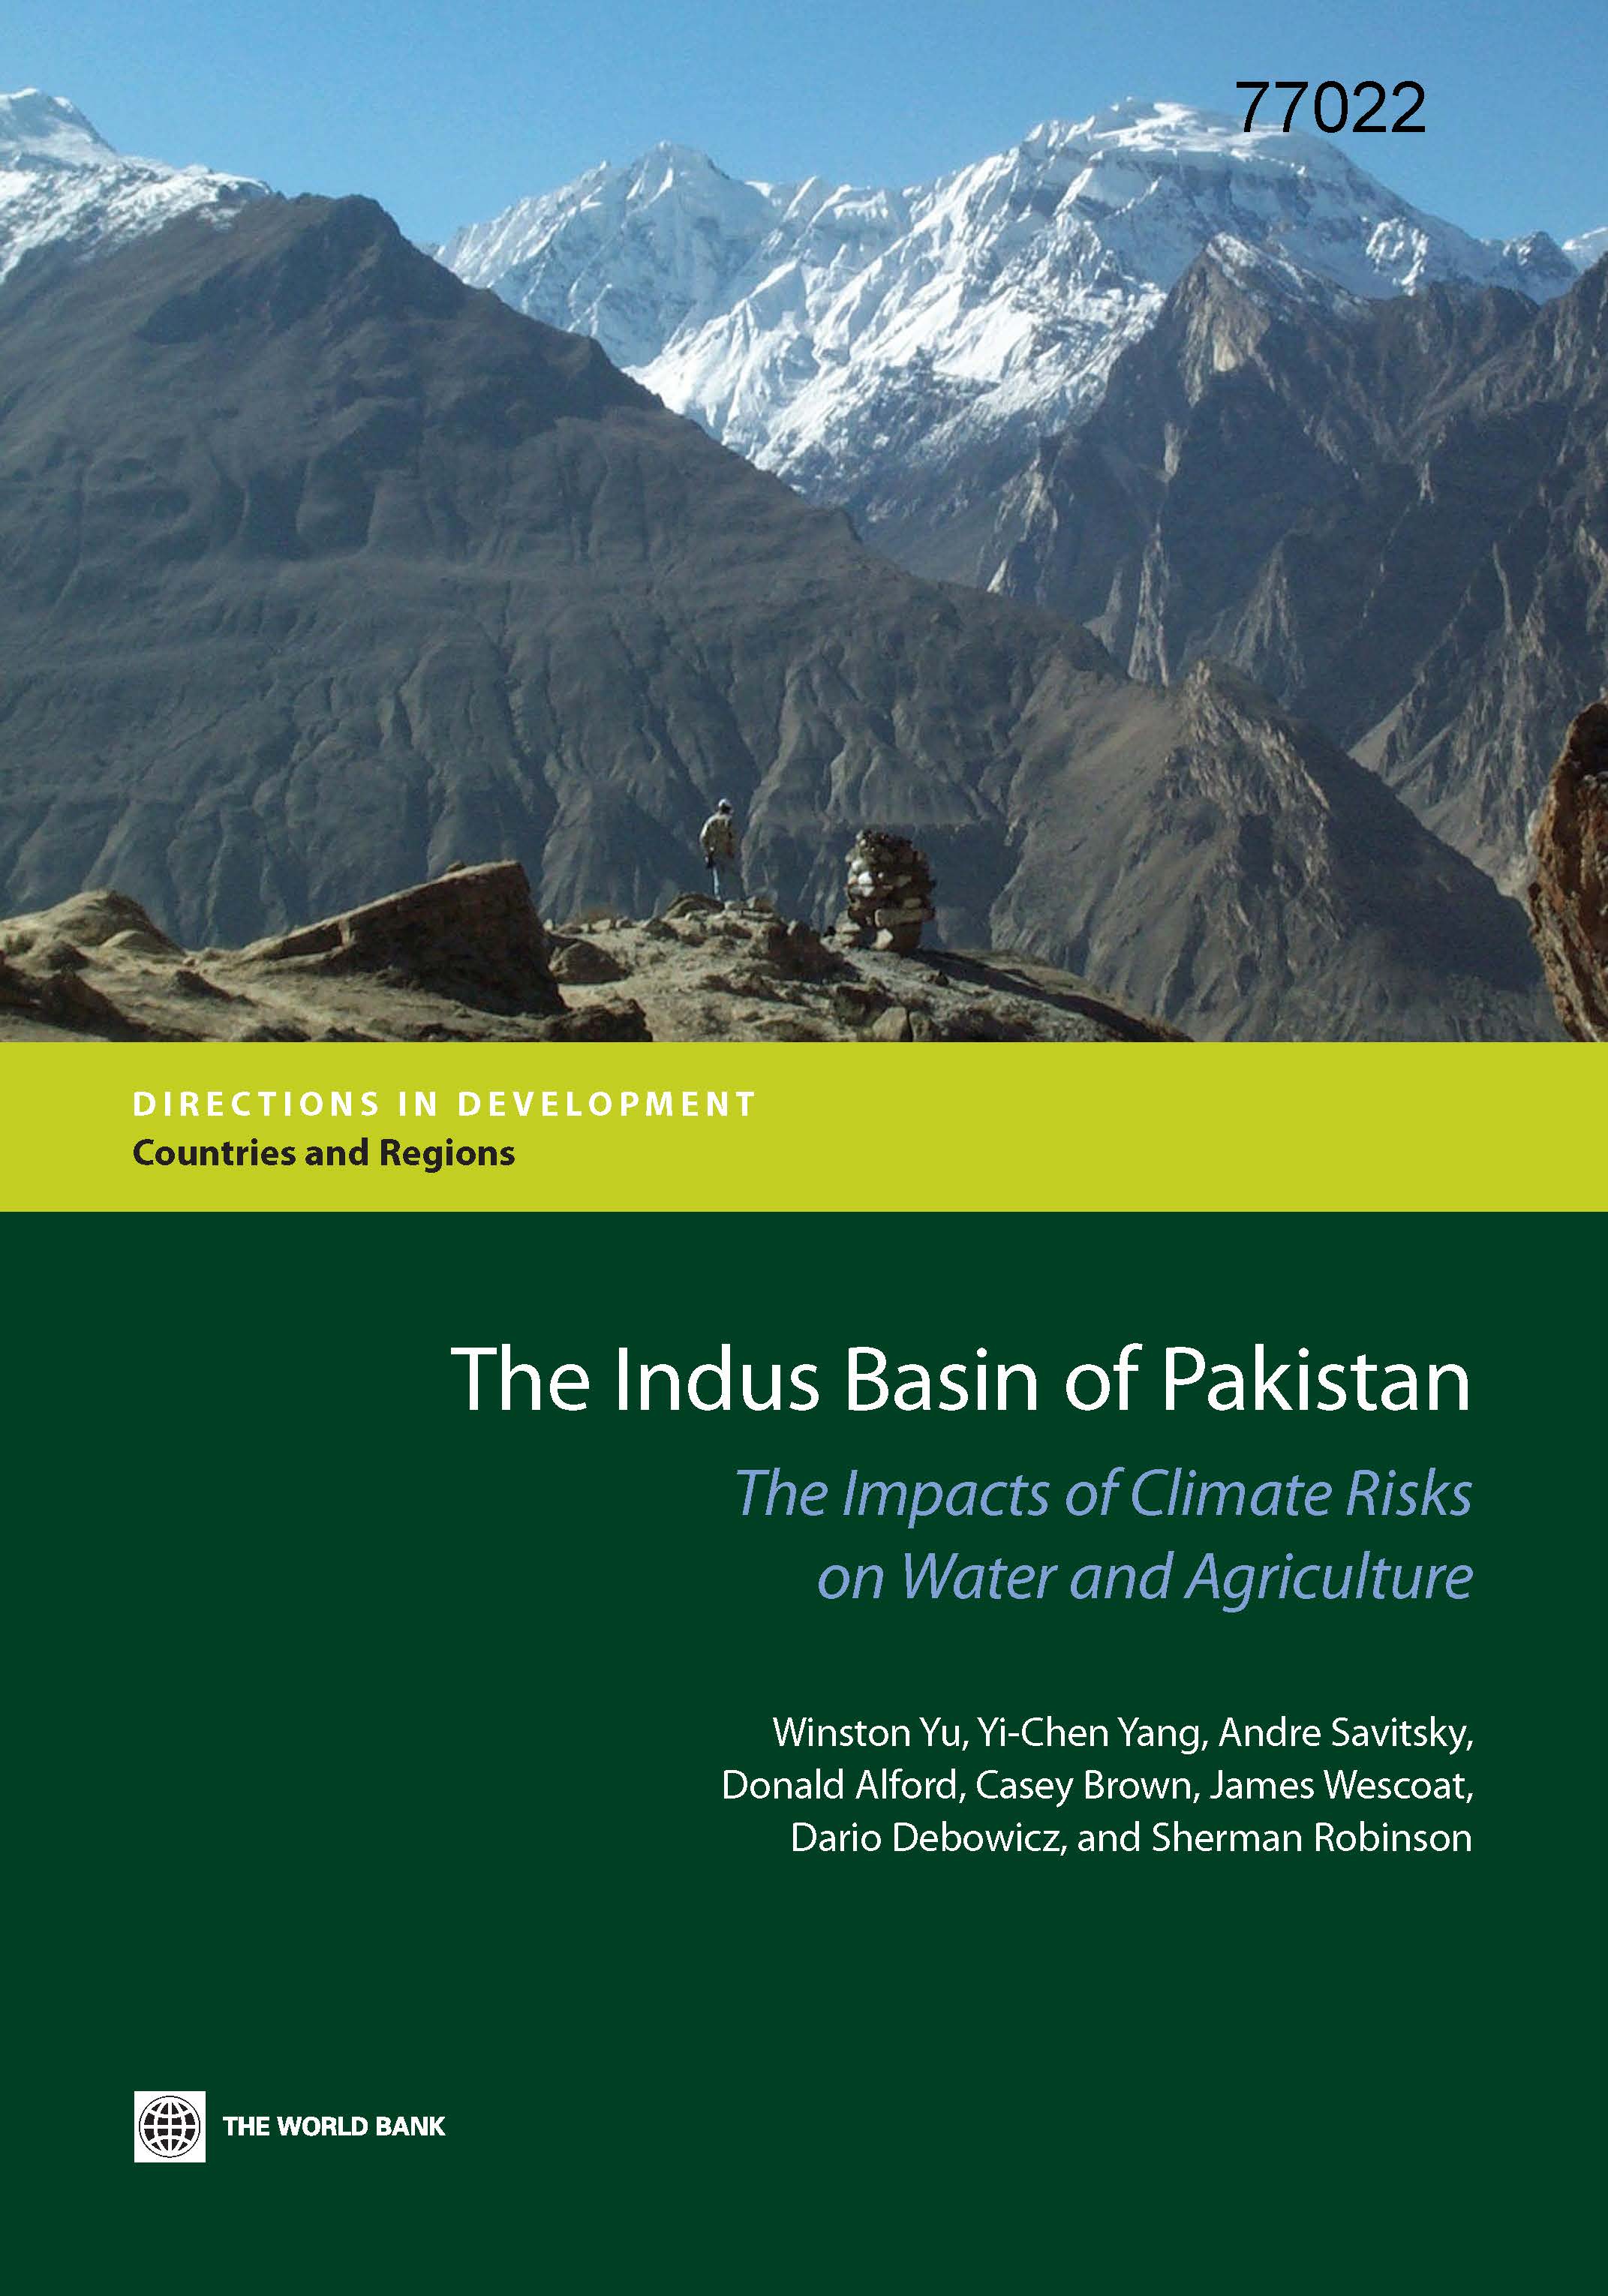 The Indus Basin of Pakistan: The Impacts of Climate Risks on Water and Agriculture